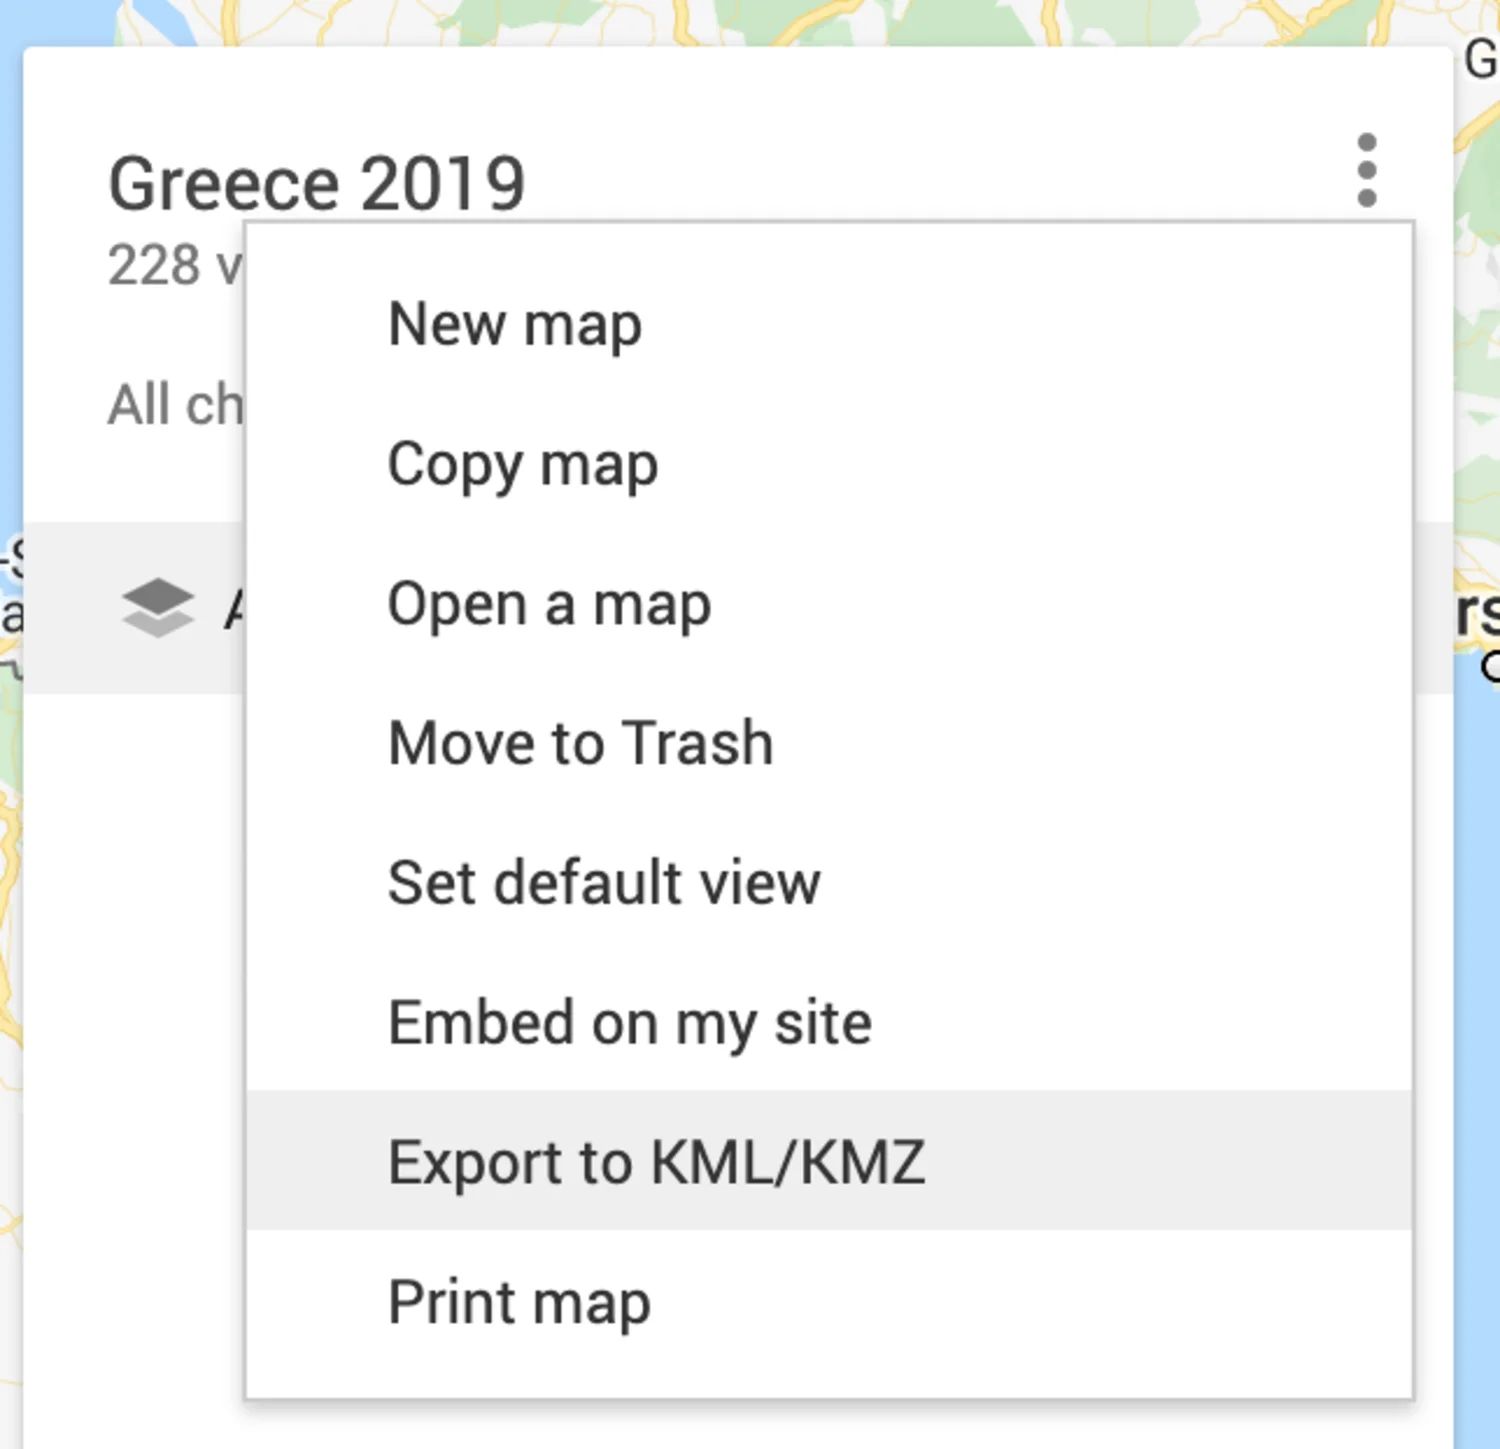 Export KML file from  [Google Maps](https://www.google.com/maps/d/u/0/home)  and upload it in  [Colab](https://colab.research.google.com/)